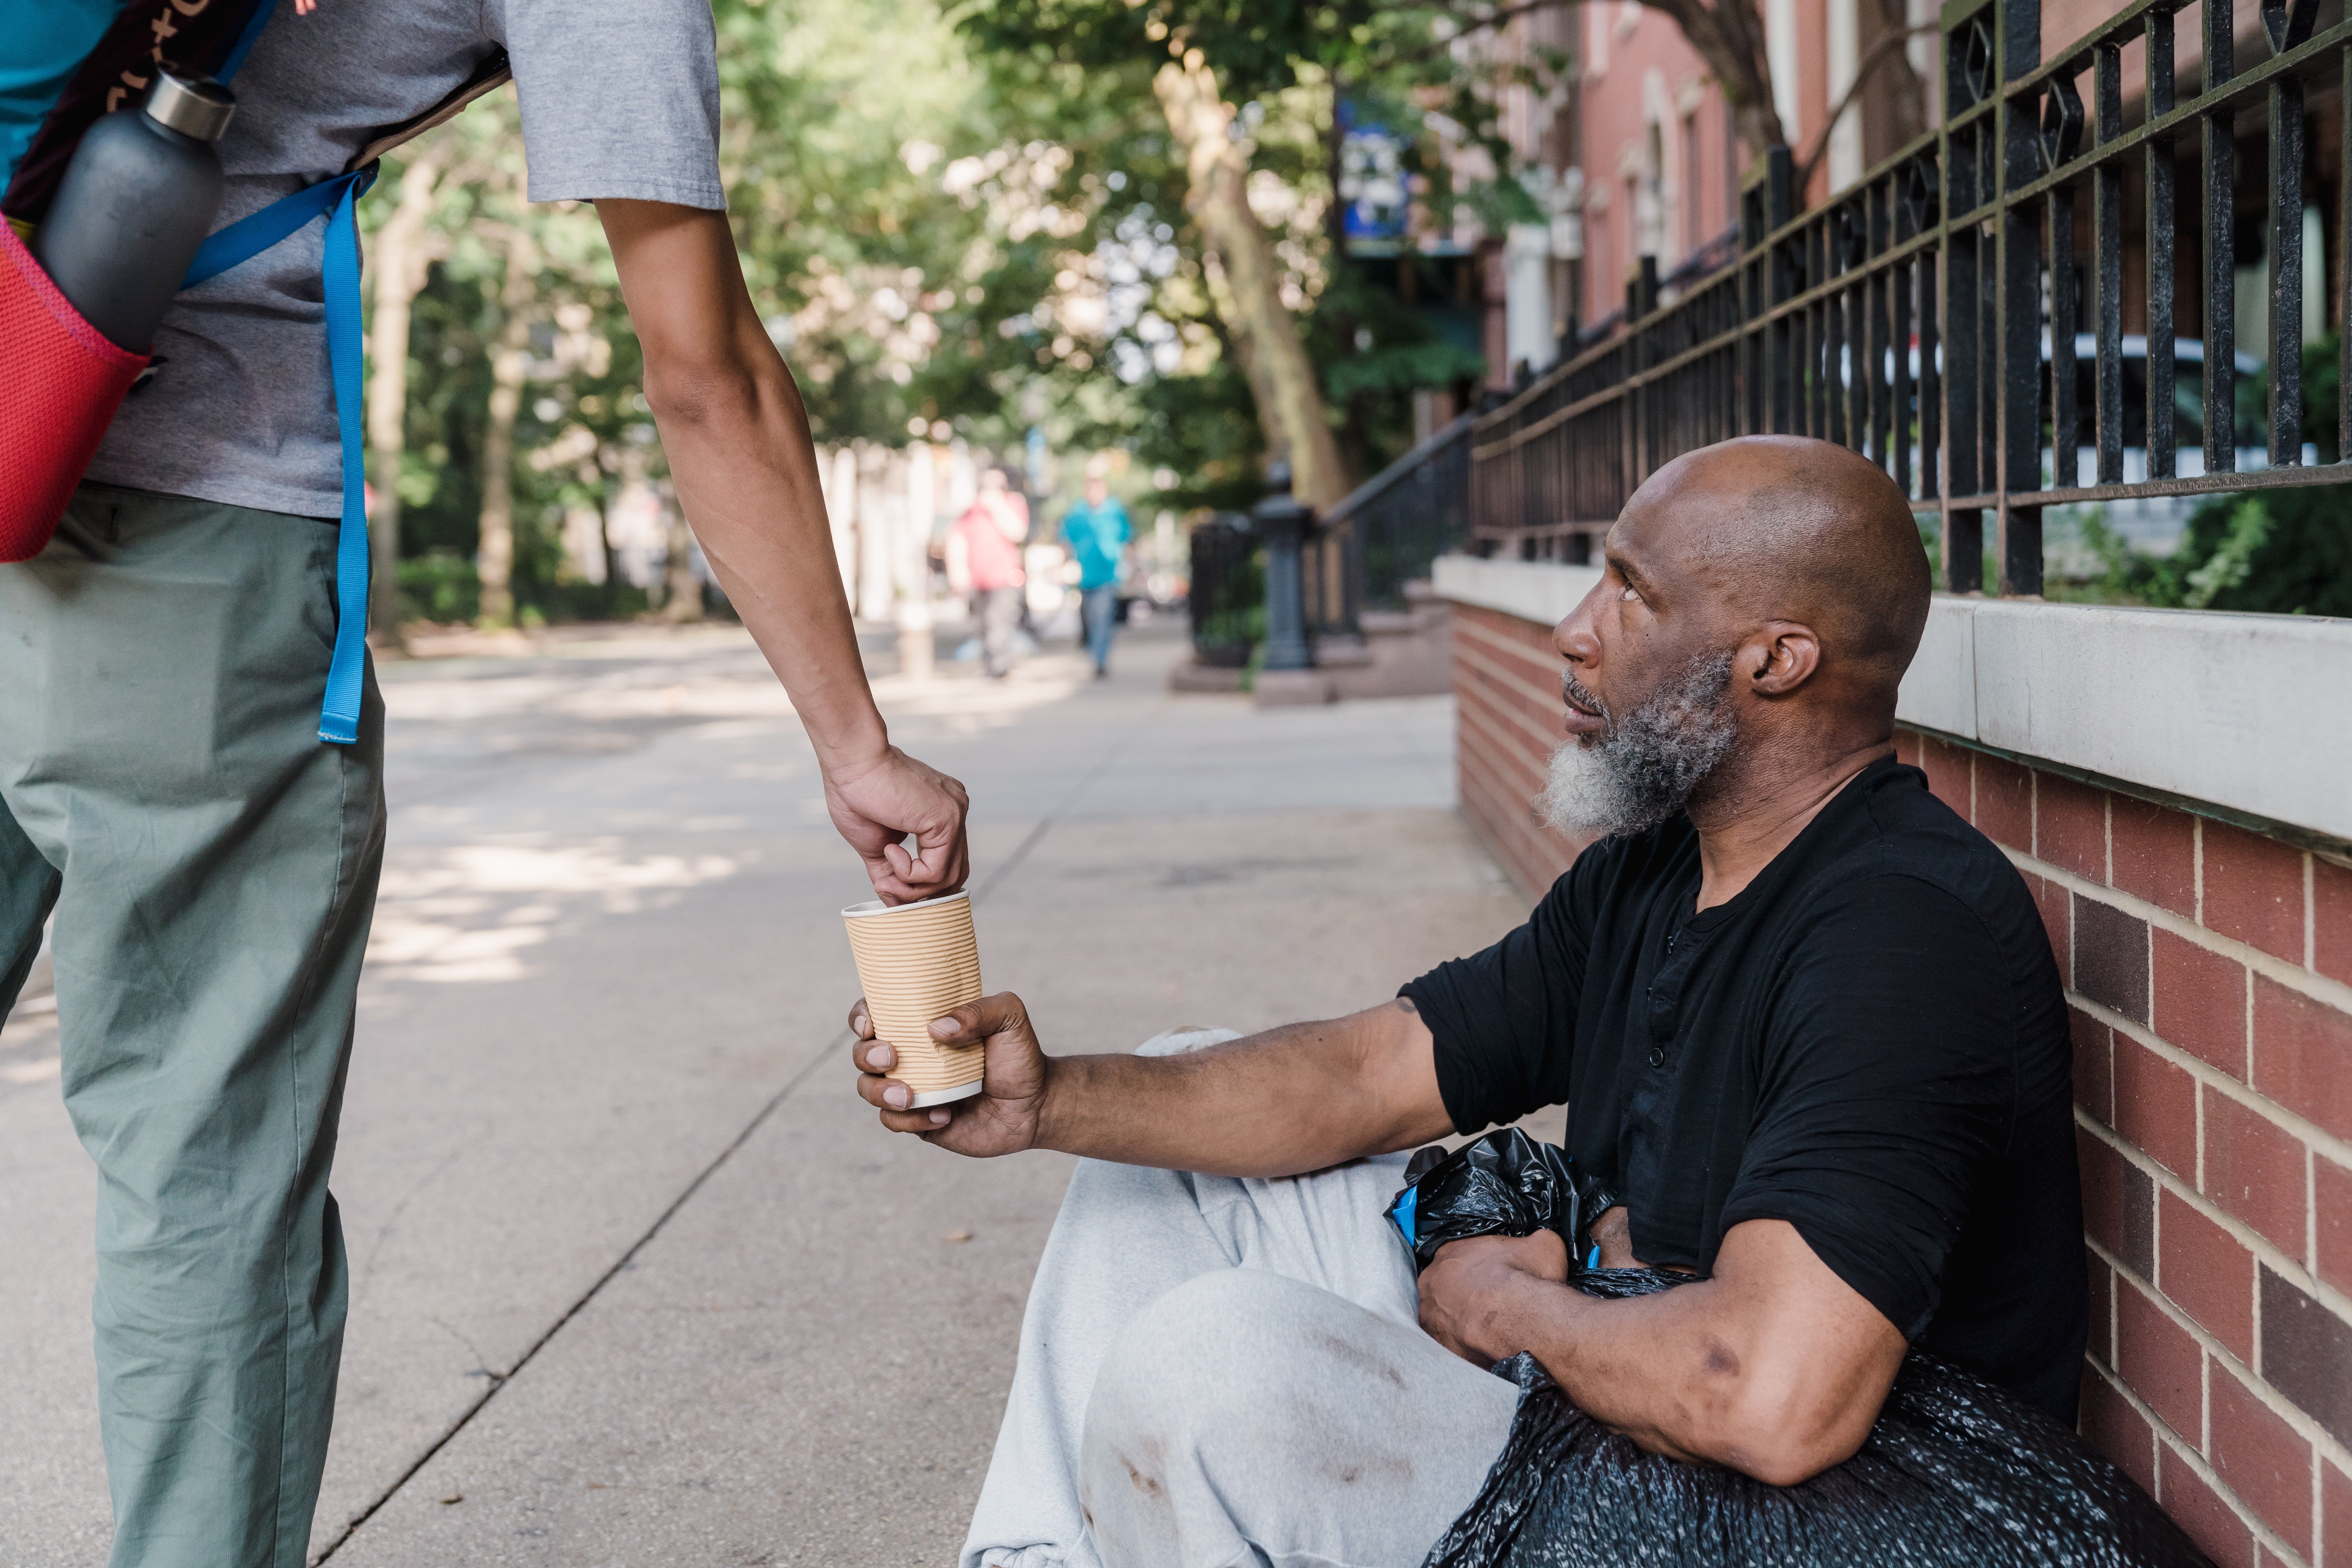 There was a homeless man on the street. | Source: Pexels